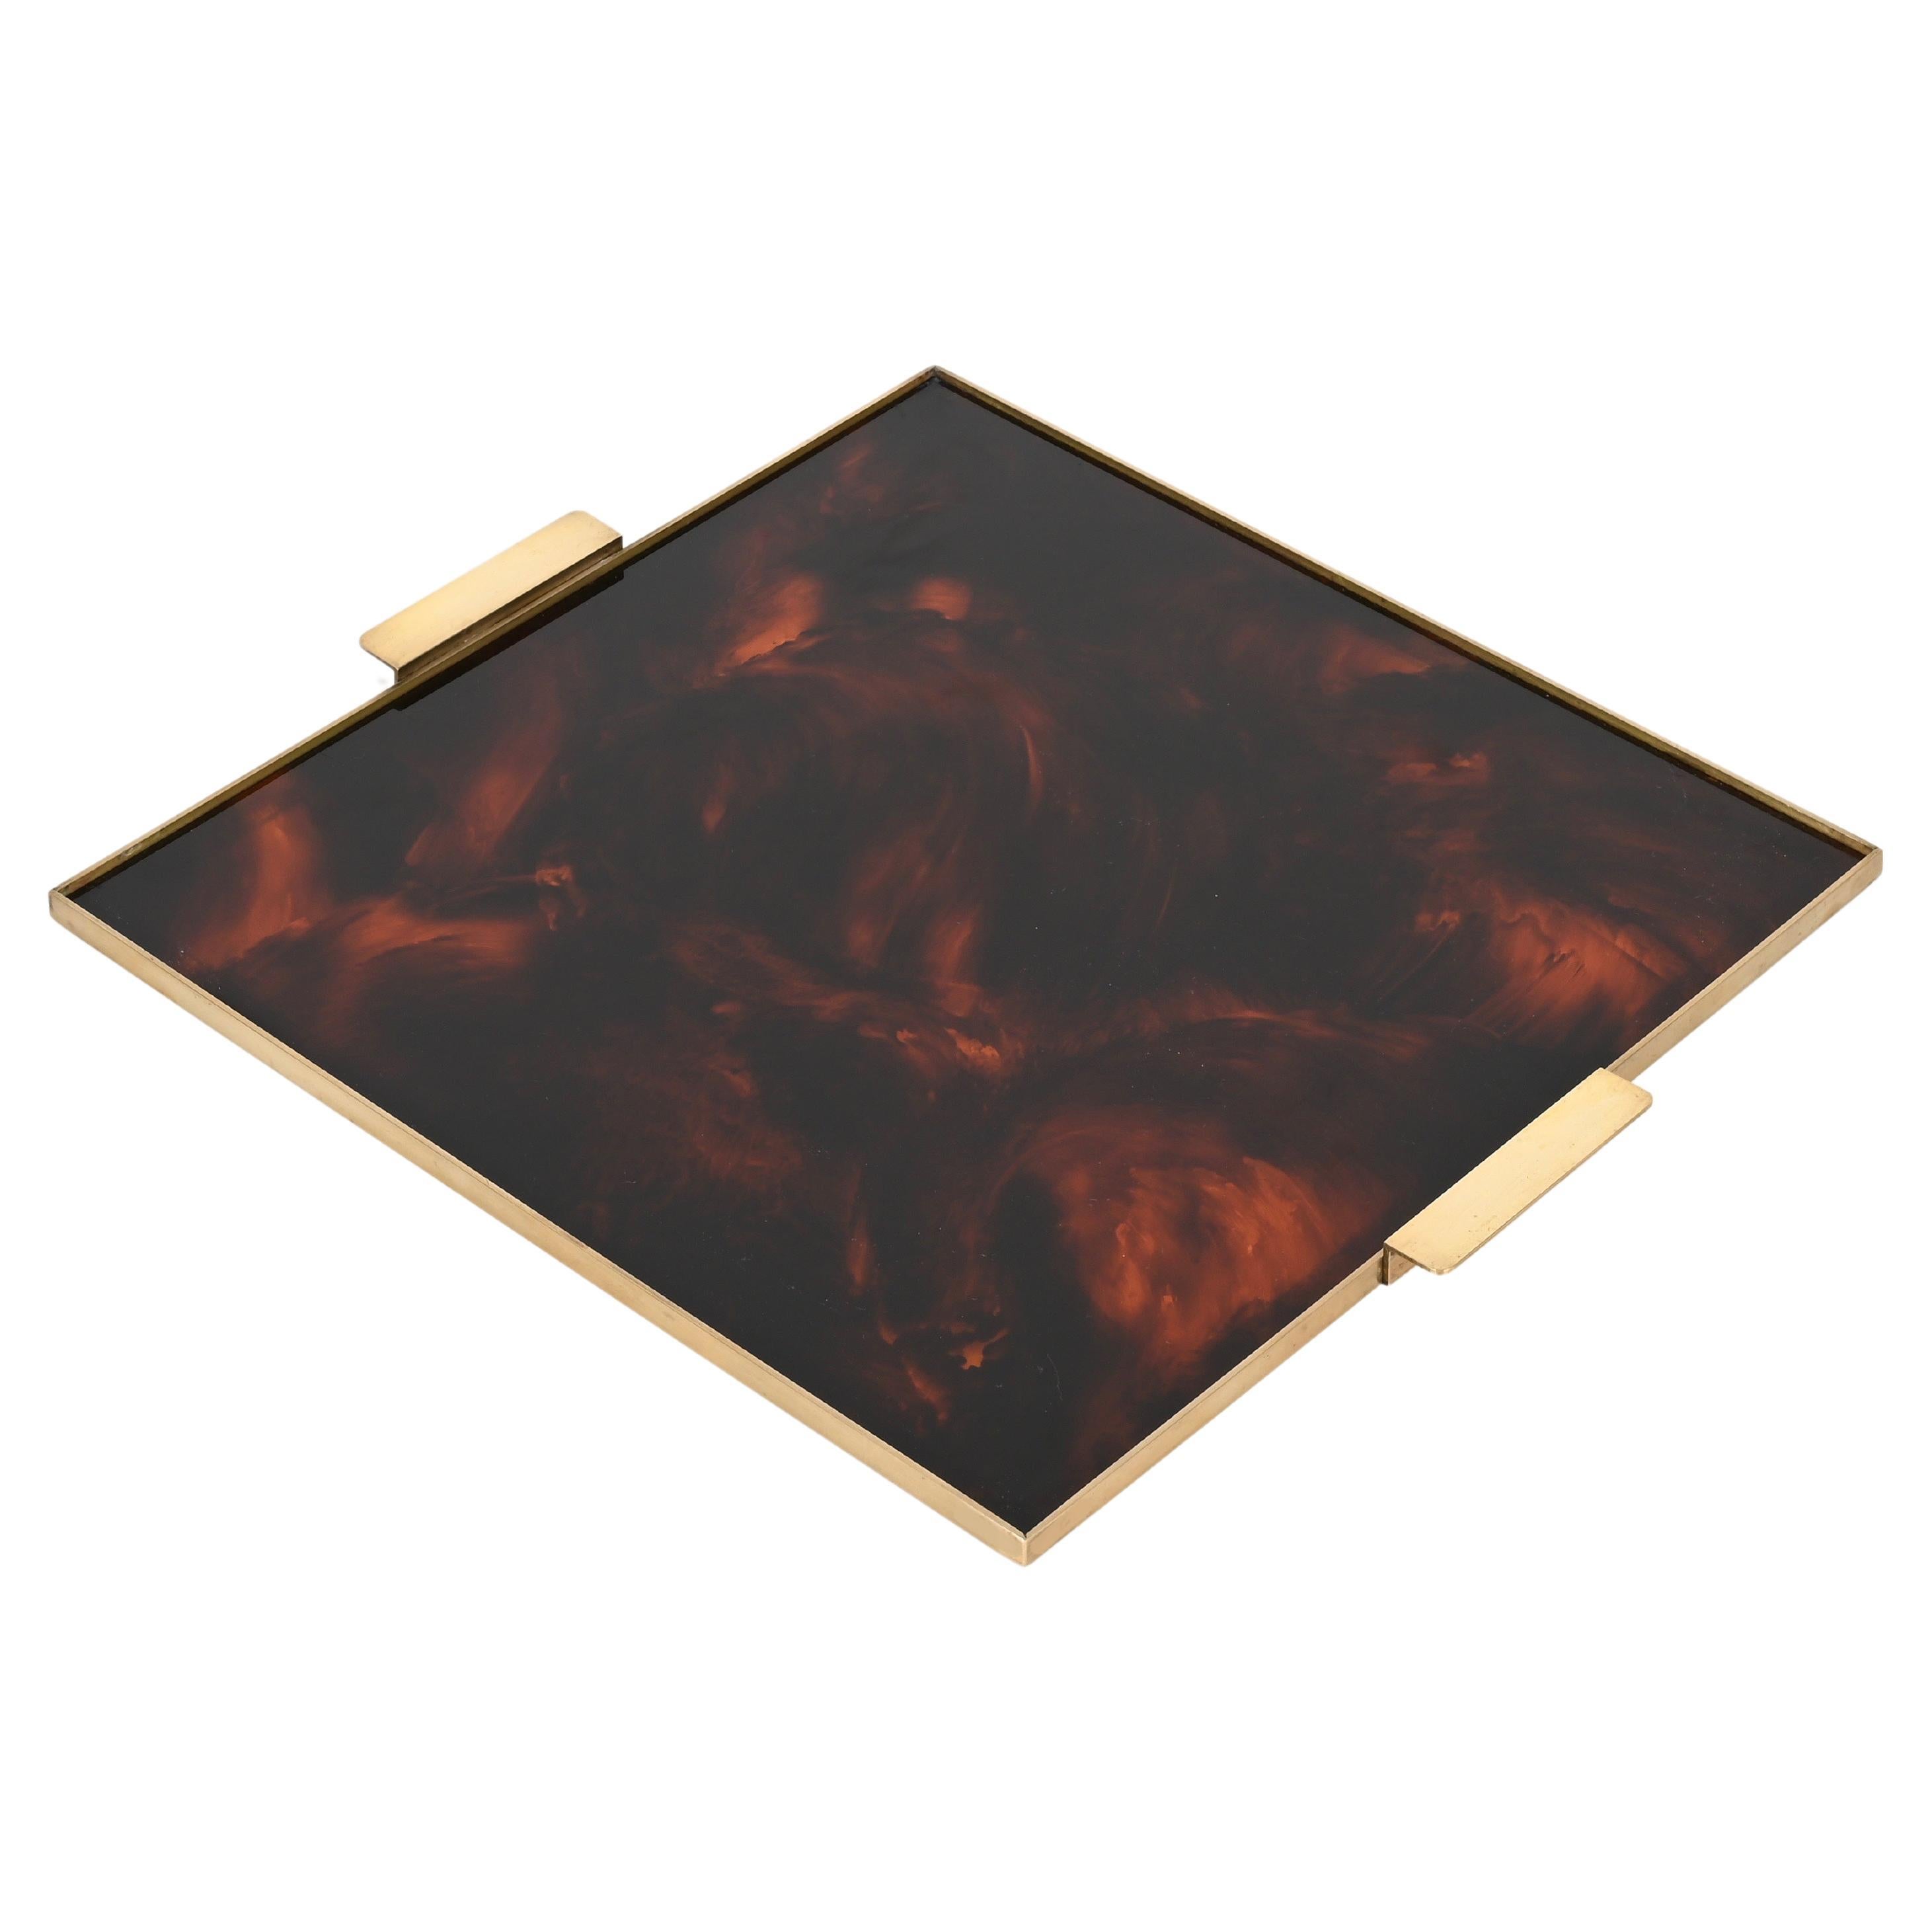 Christian Dior Tortoiseshell Lucite and Brass Square Serving Tray, Italy 1970s